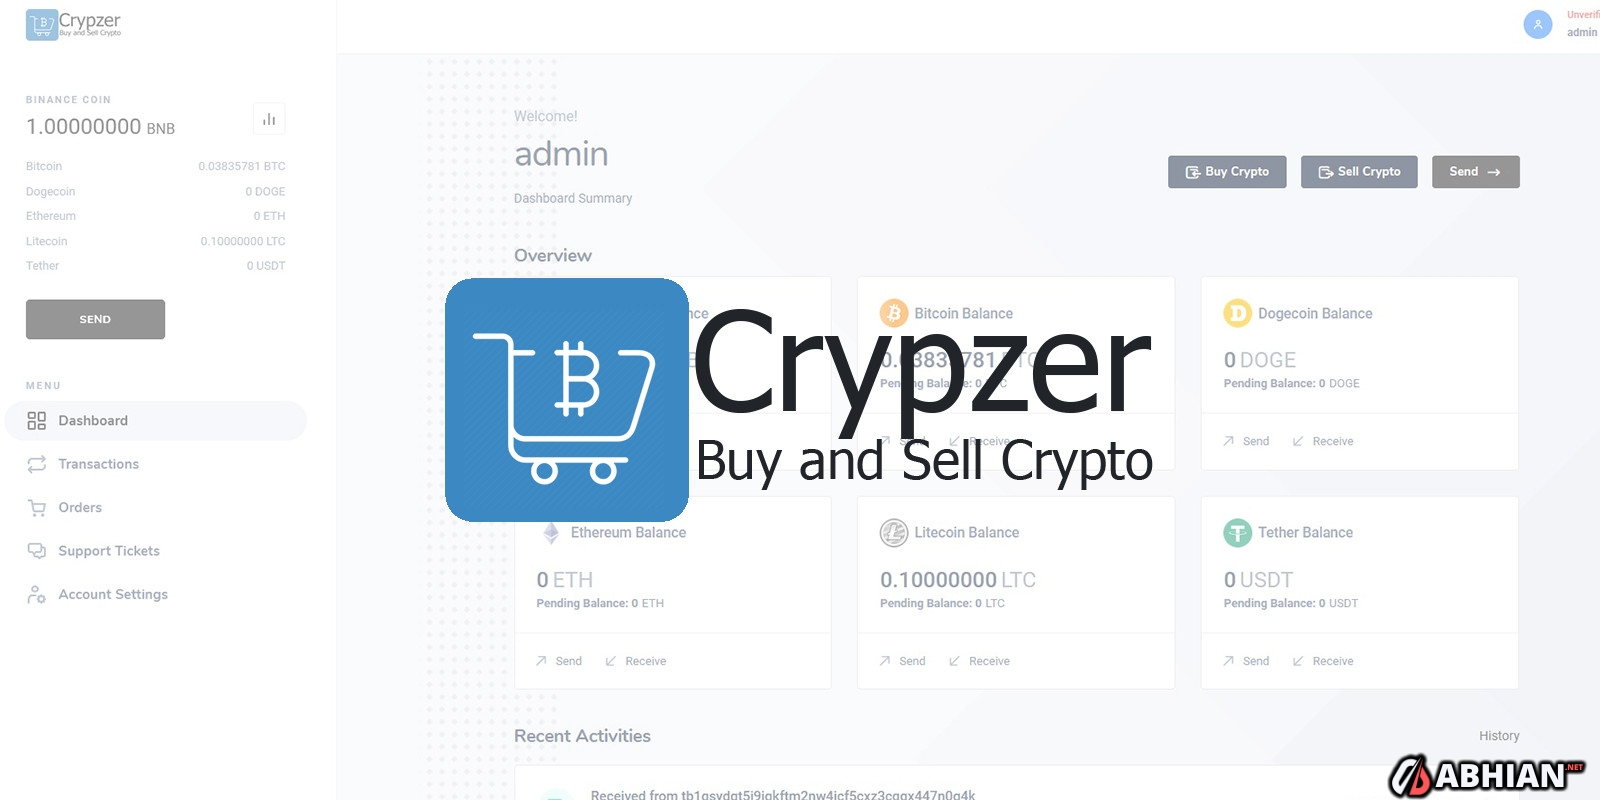 Crypzer - Buy and Sell Crypto Currency